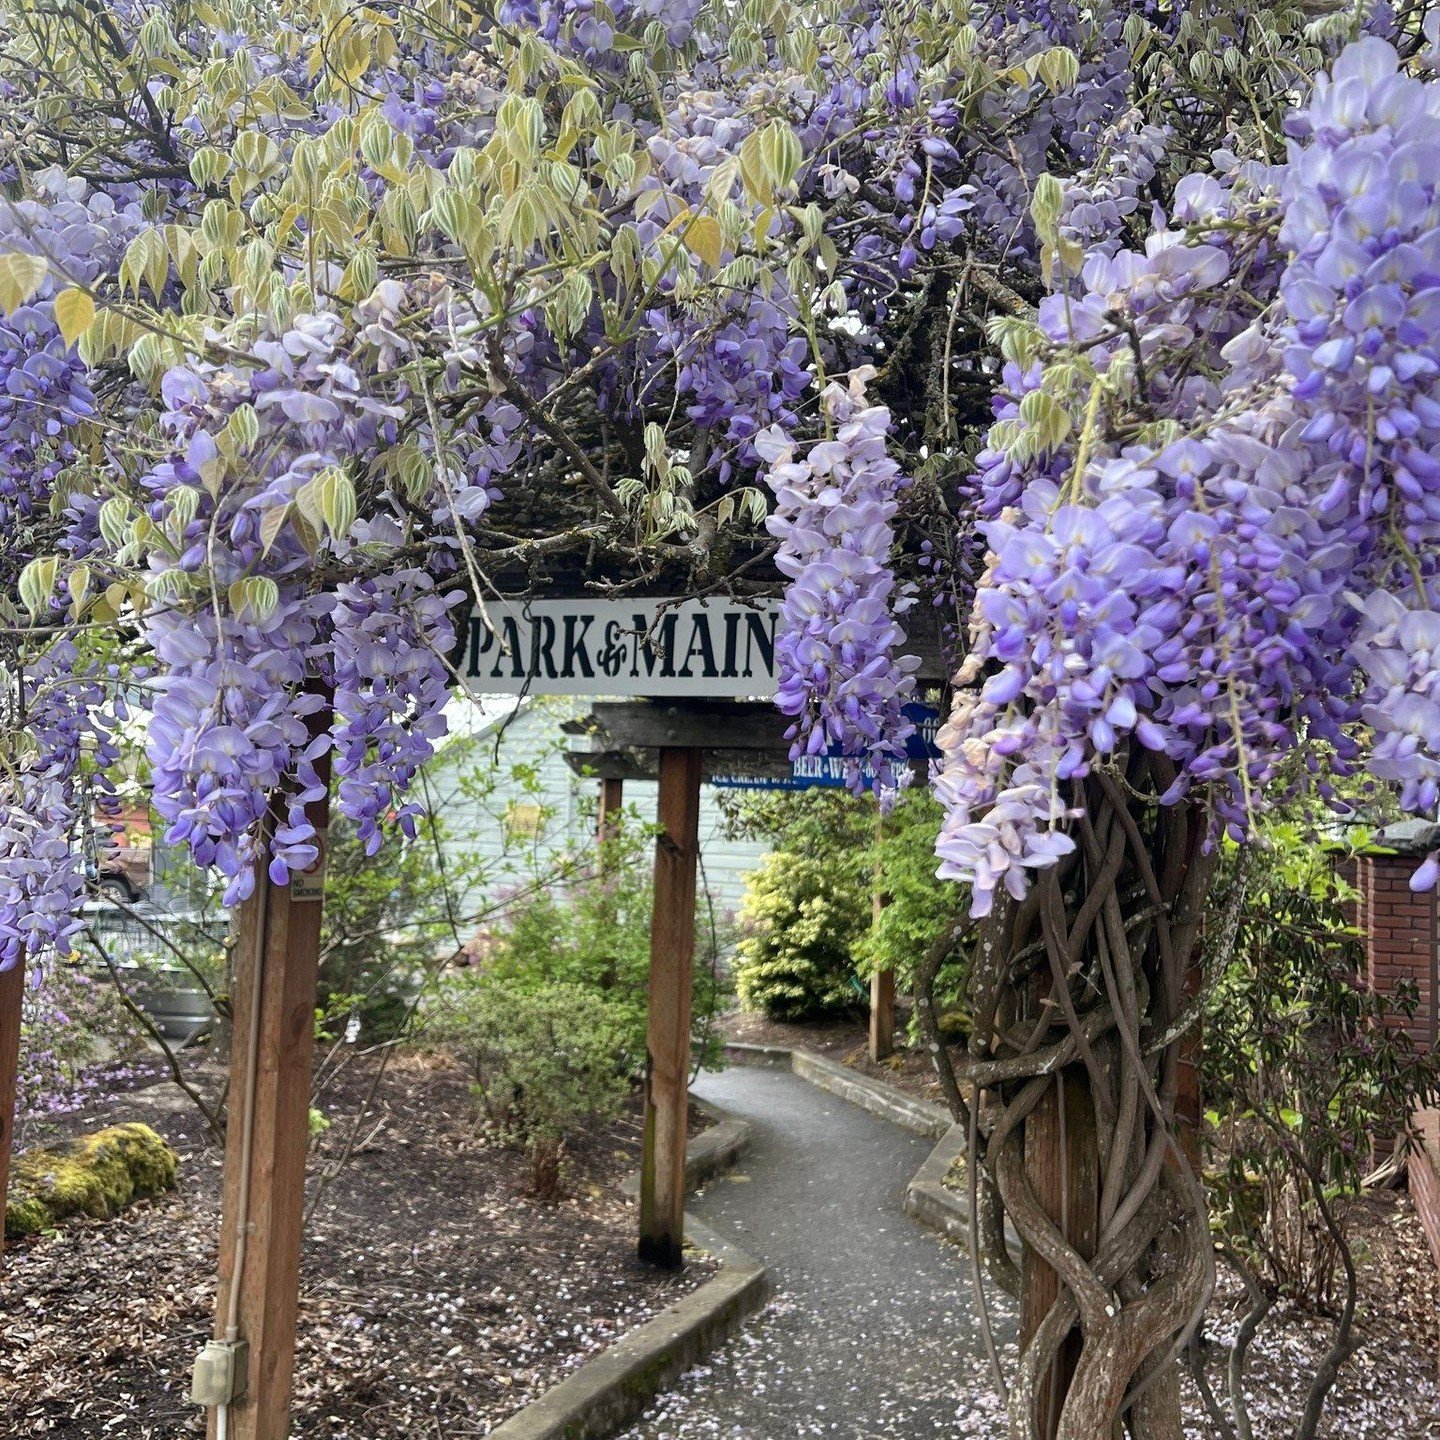 This pathway to @parkandmaincarlton is so dreamy! Join them on Thursdays this month from 5-8 pm for a rotating wine flight featuring Oregon Wine in celebration of Oregon Wine Month. 

#carltonbusinessassociation #carltonoregon #oregonwinemonth #orego